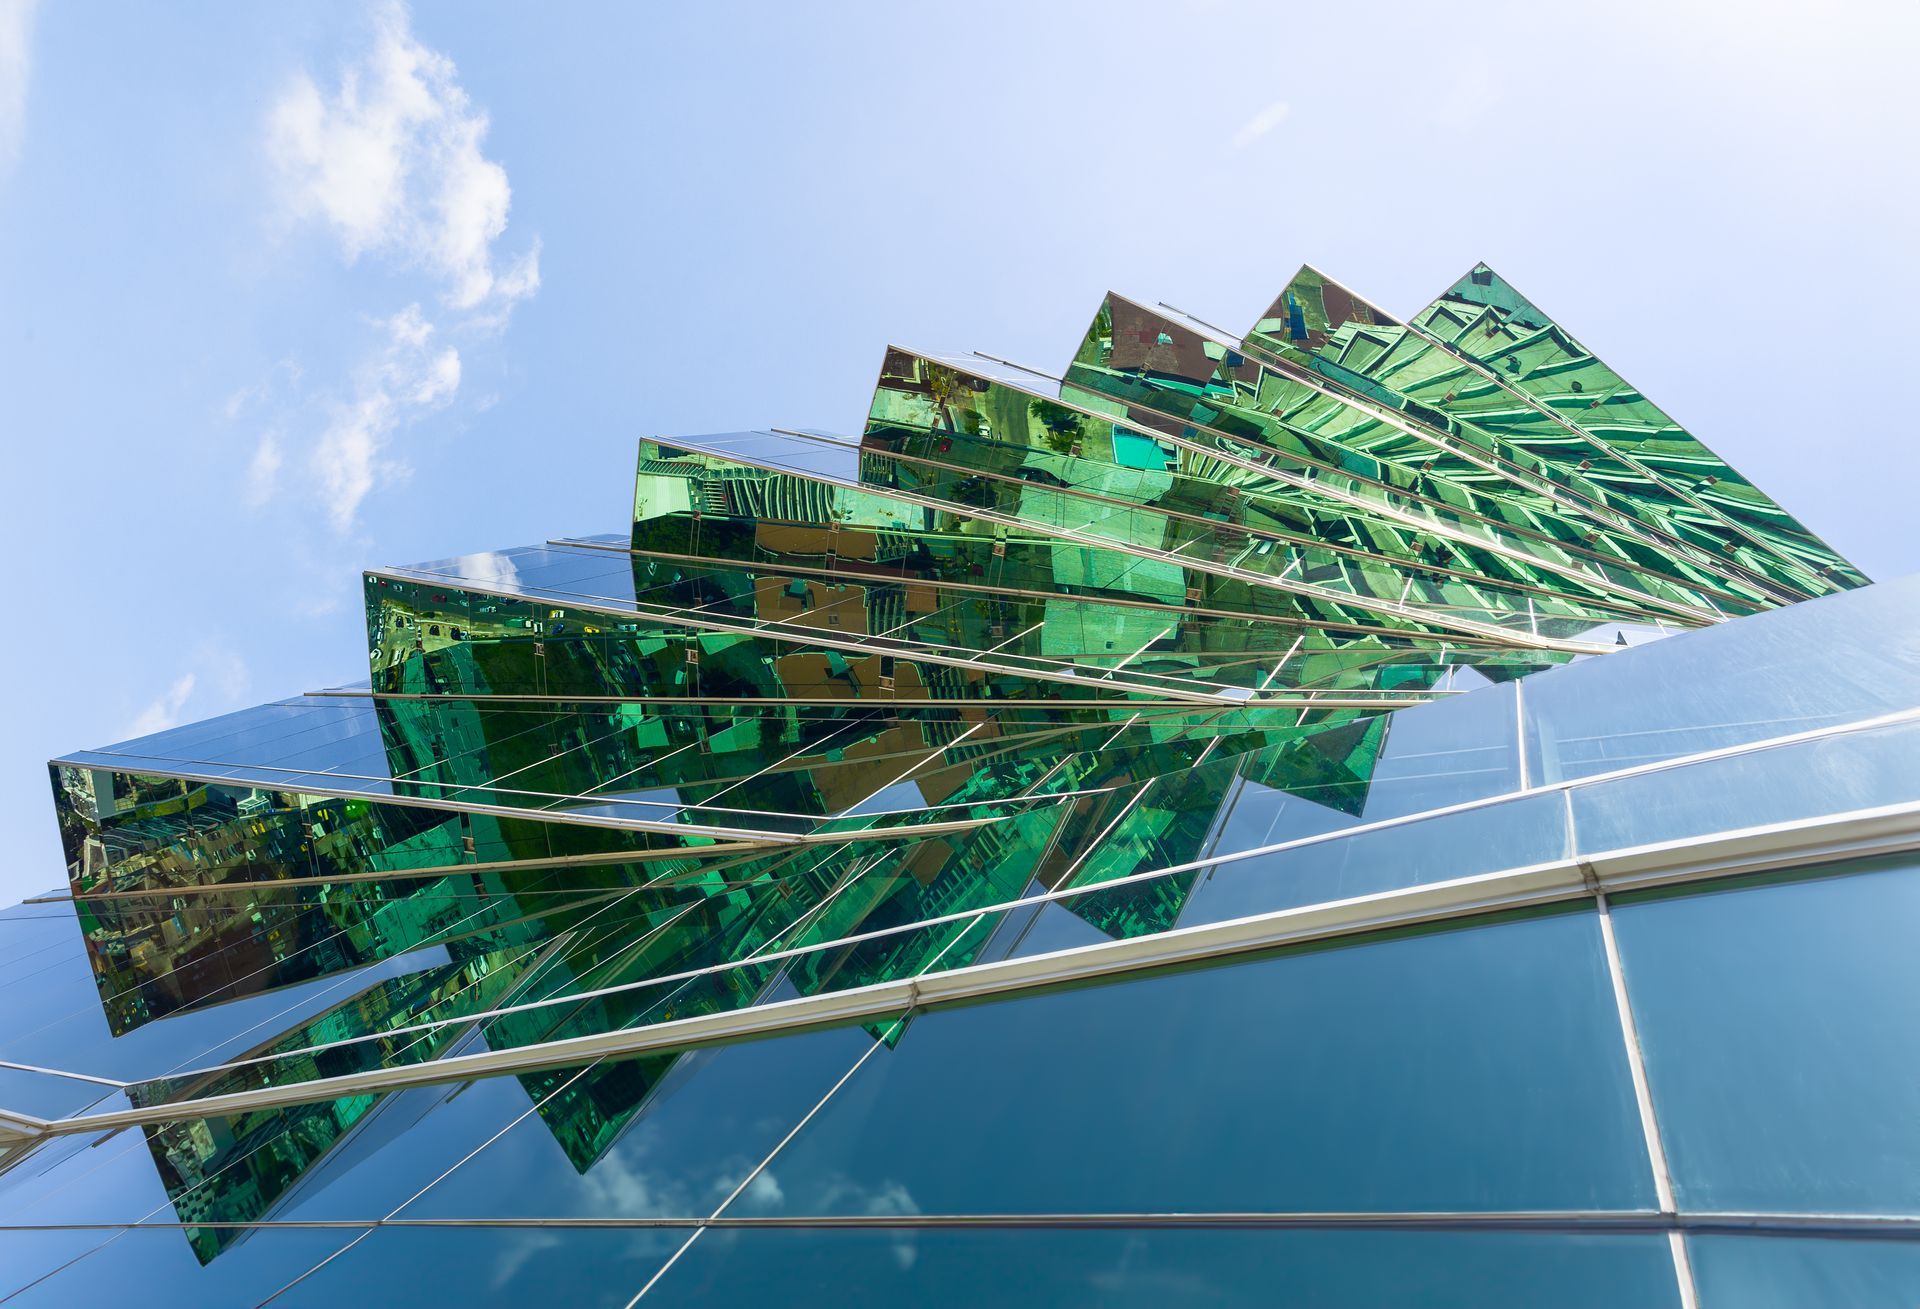 A green sculpture on the side of a building with a blue sky in the background.